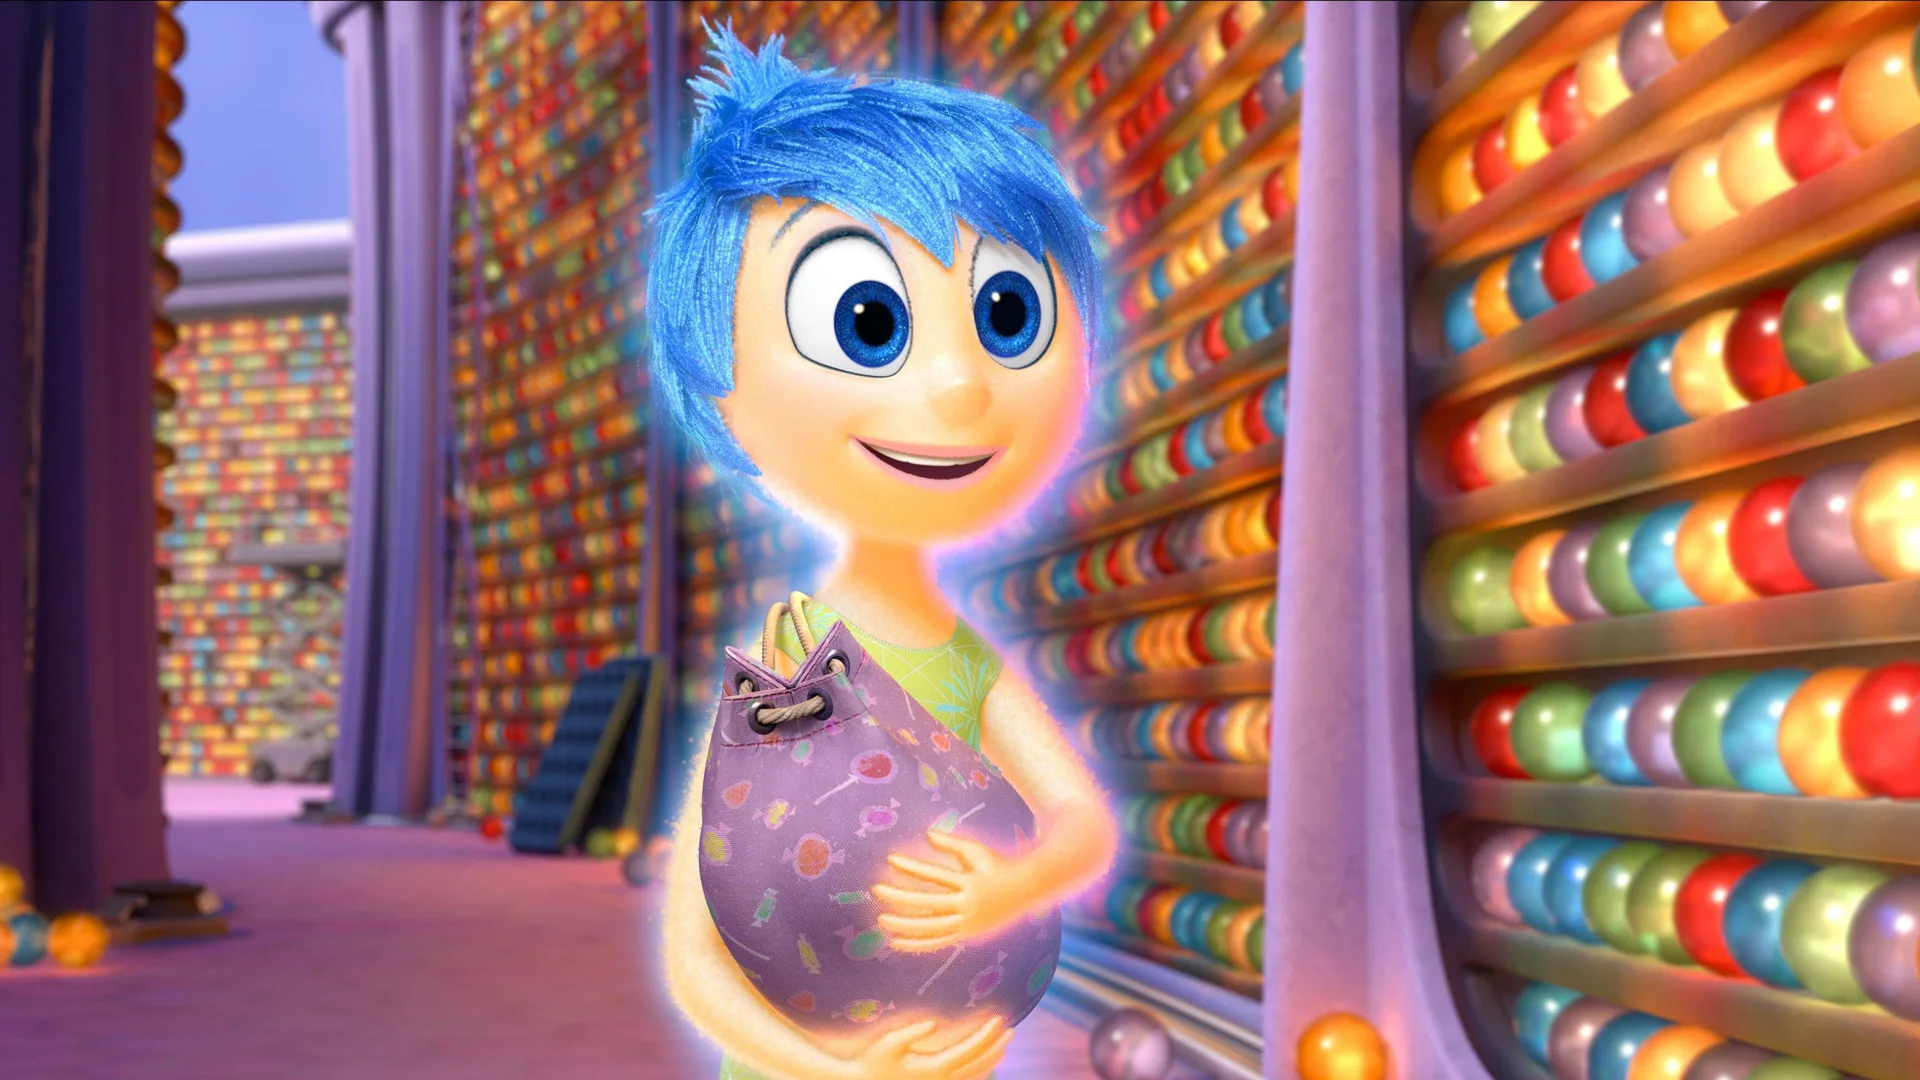 A scene from Disney/Pixar's Inside Out showing Joy holding a bag of memories and smiling at someone off camera